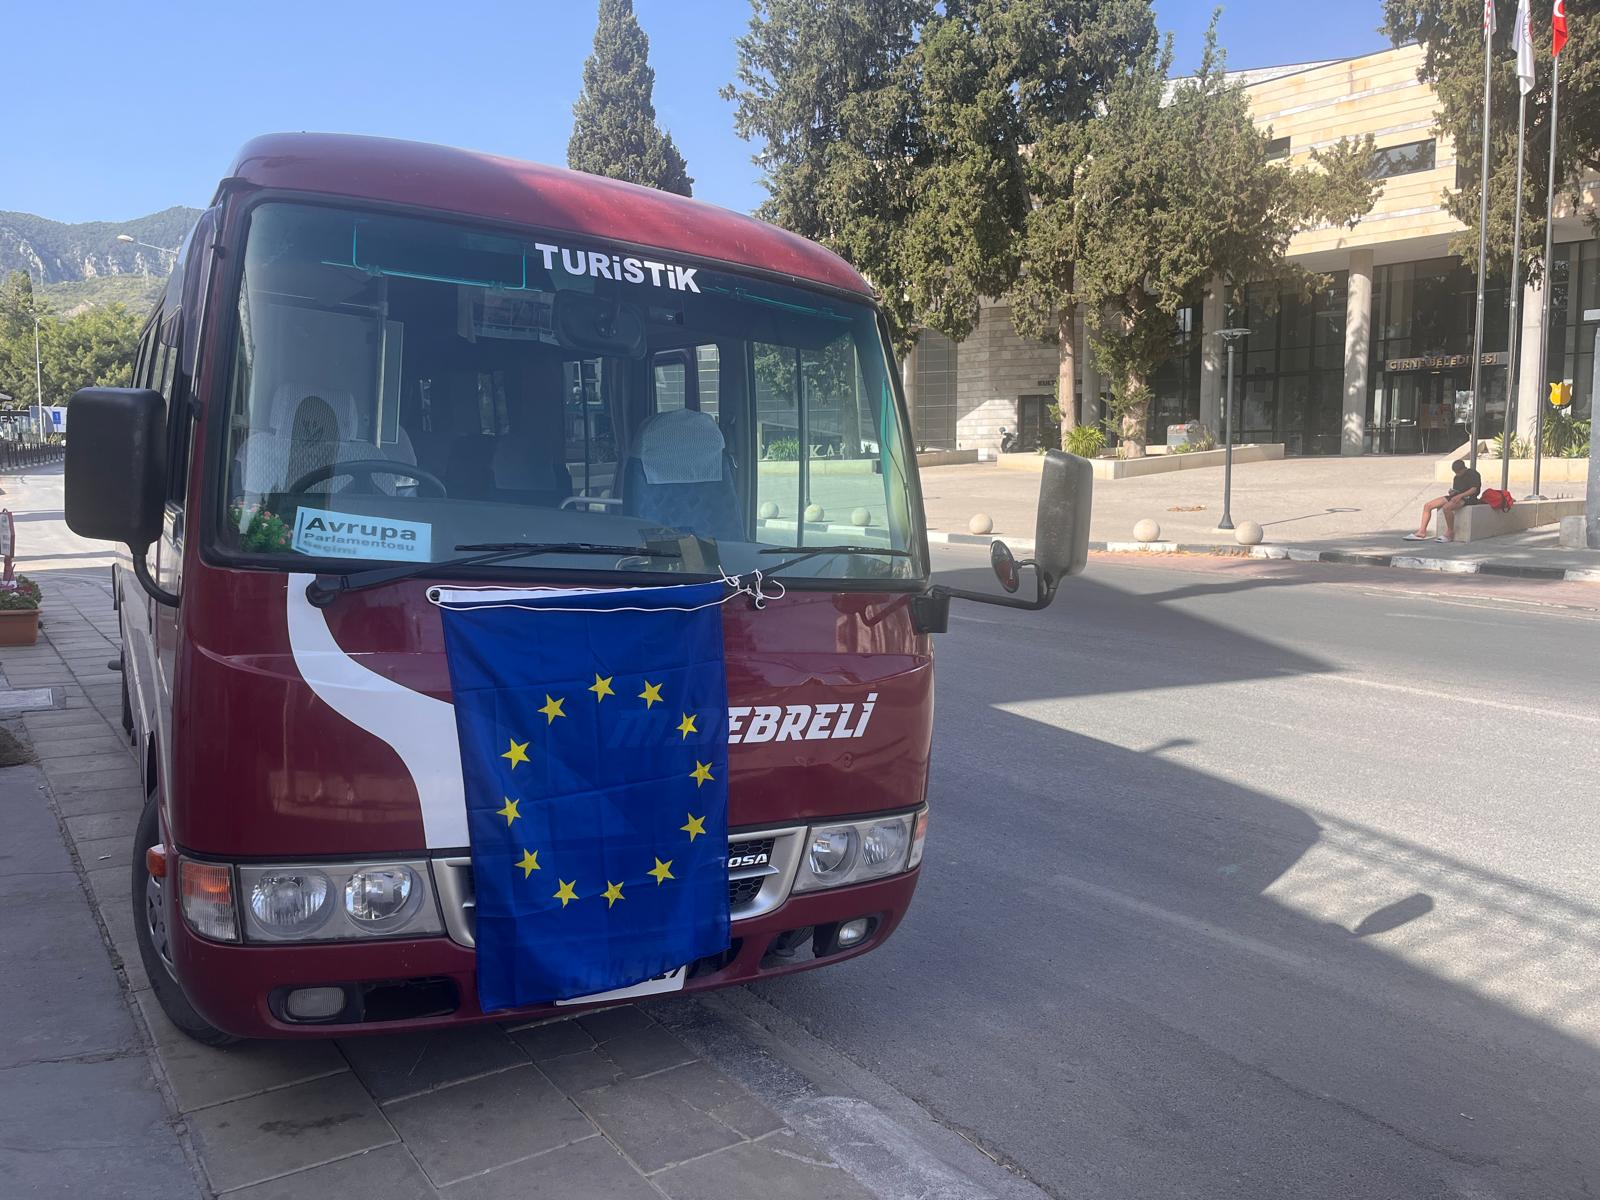 image Buses of voters depart north for EU elections